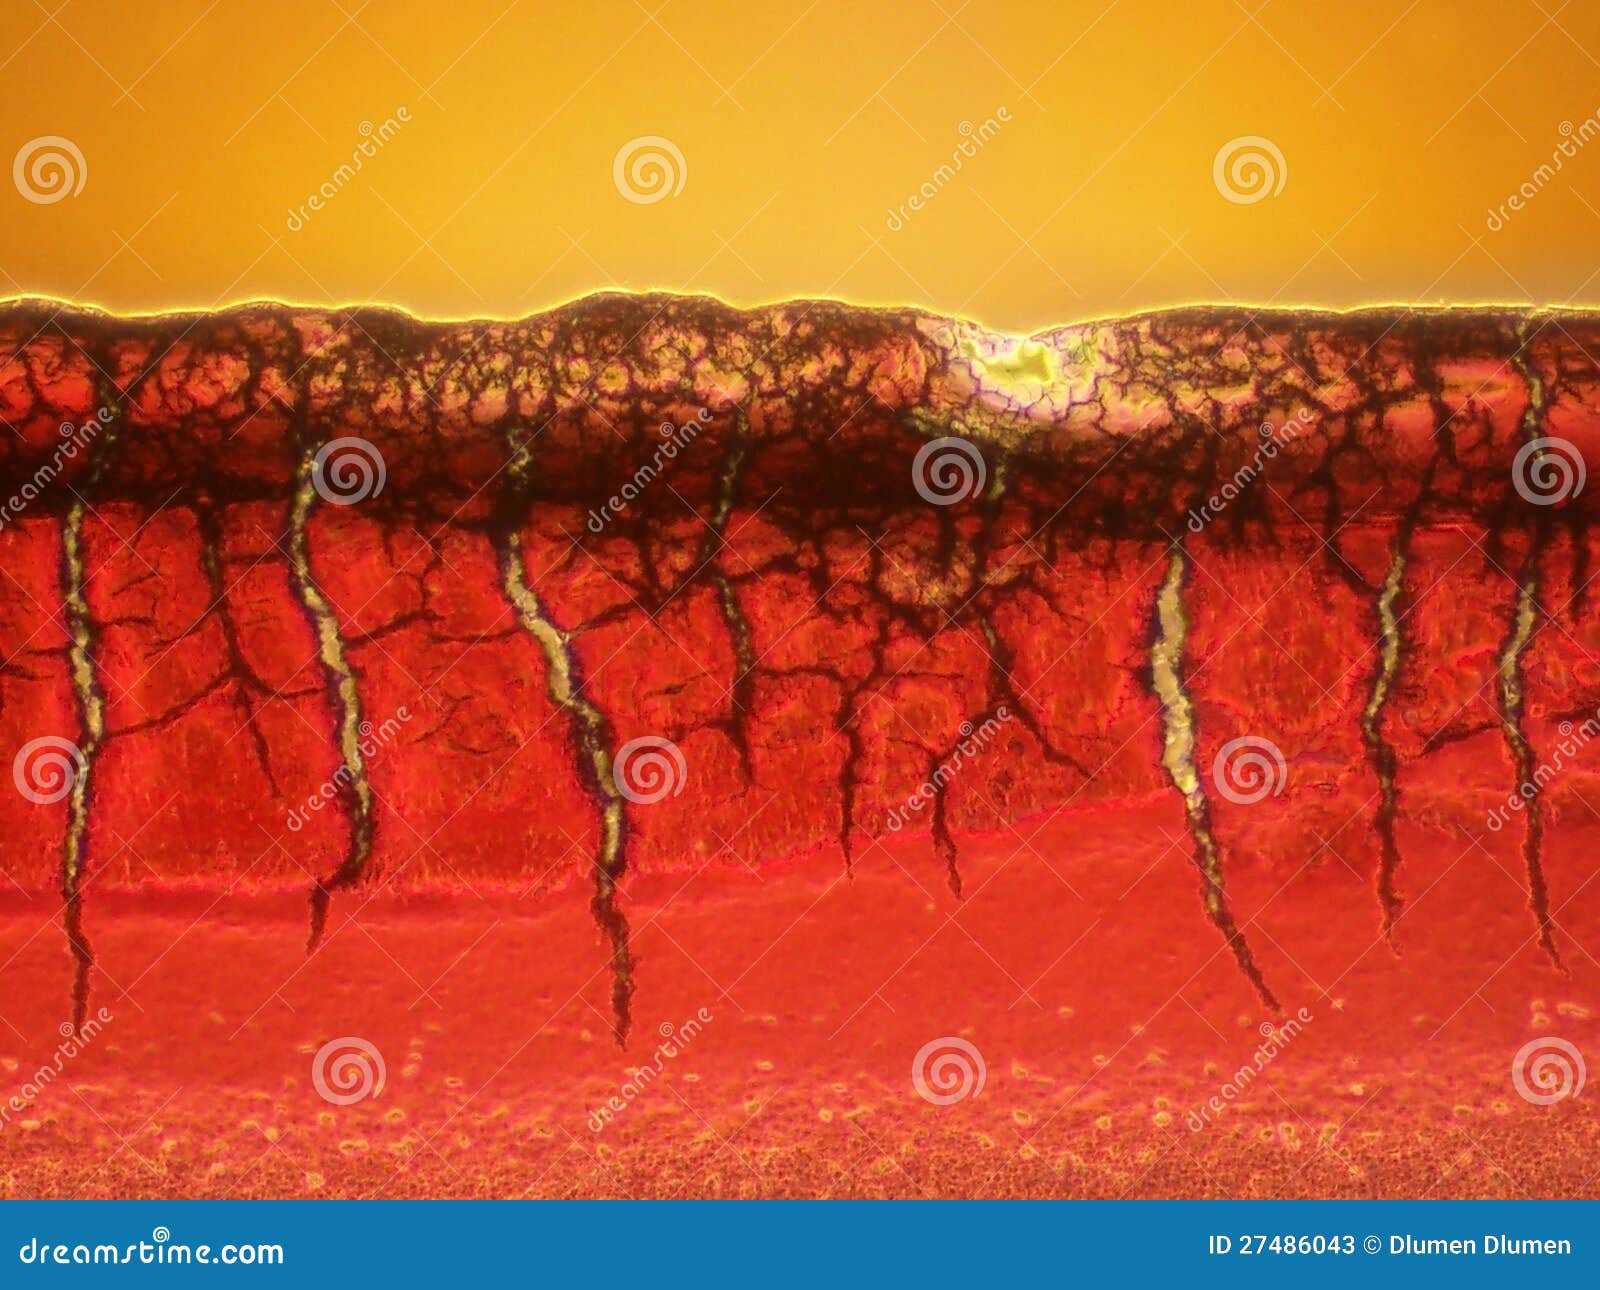 microscopic picture of a blood clot